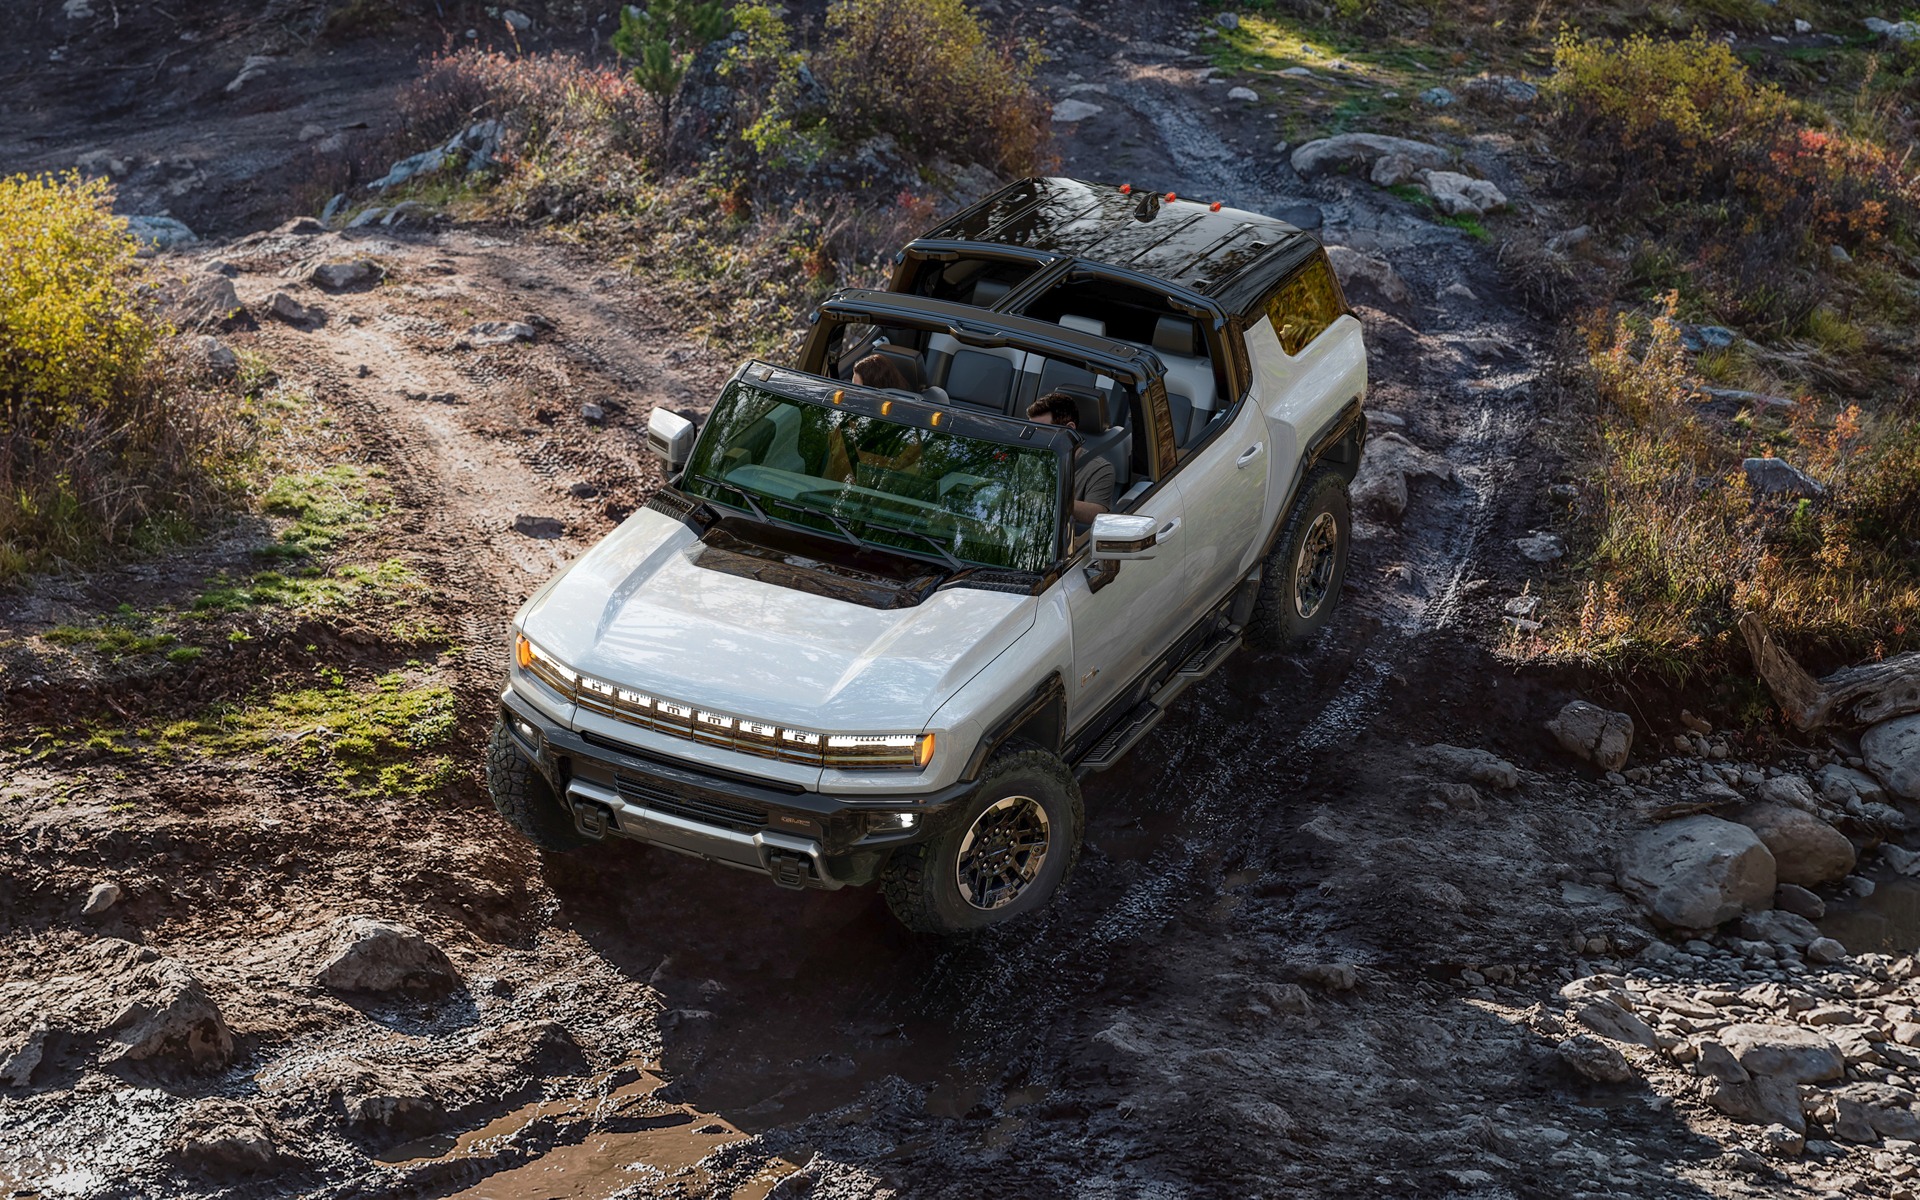 The GMC HUMMER EV SUV completes the HUMMER EV family and features a 126.7-inch wheelbase for tight proportions and a maneuverable body, providing remarkable on- and off-road capability.